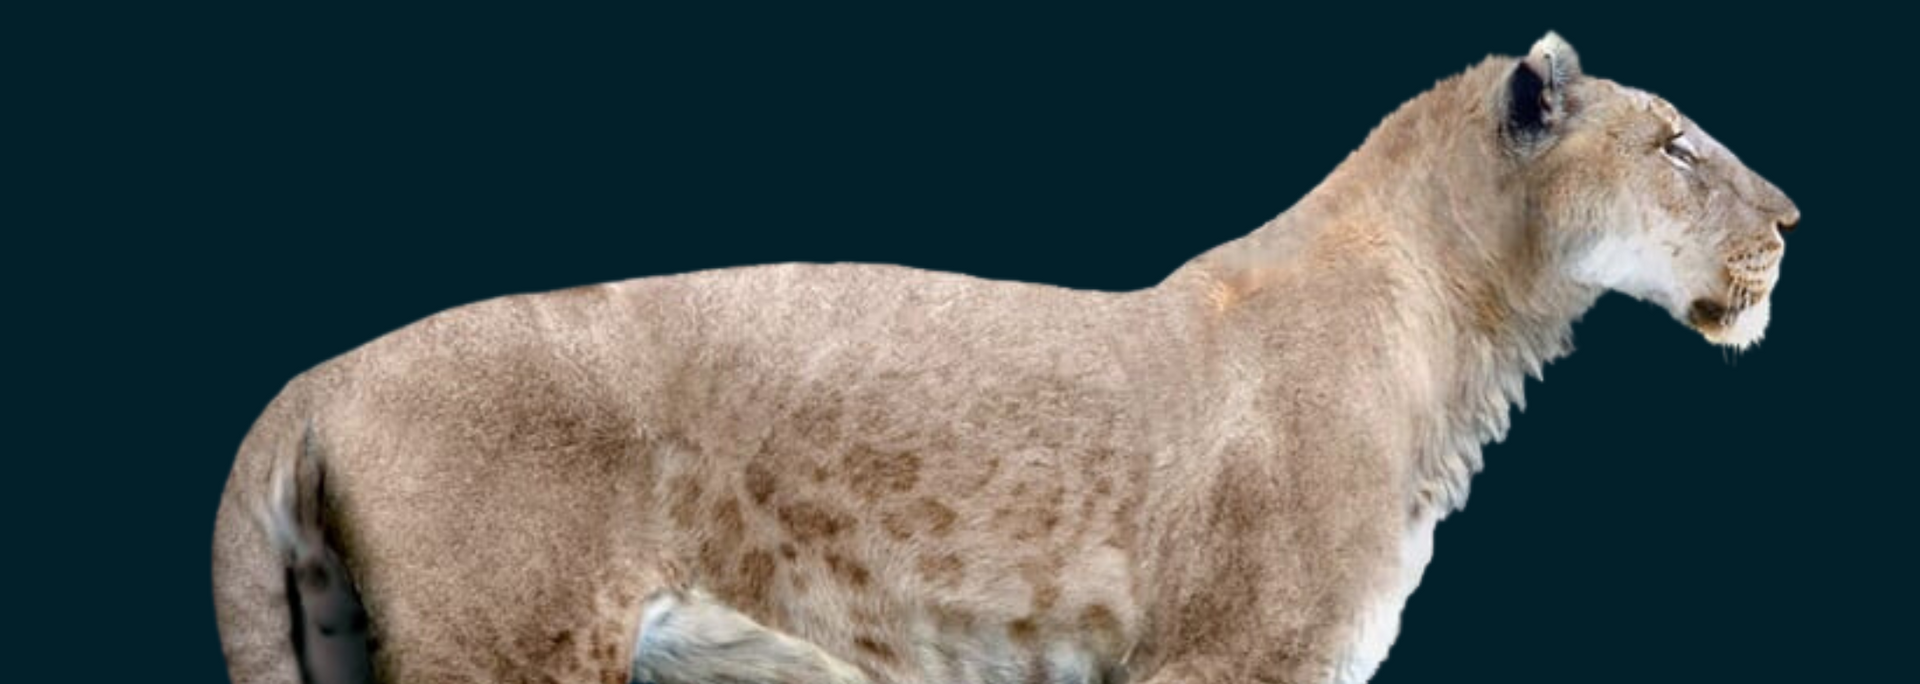 Image of a Eurasian Cave Lion